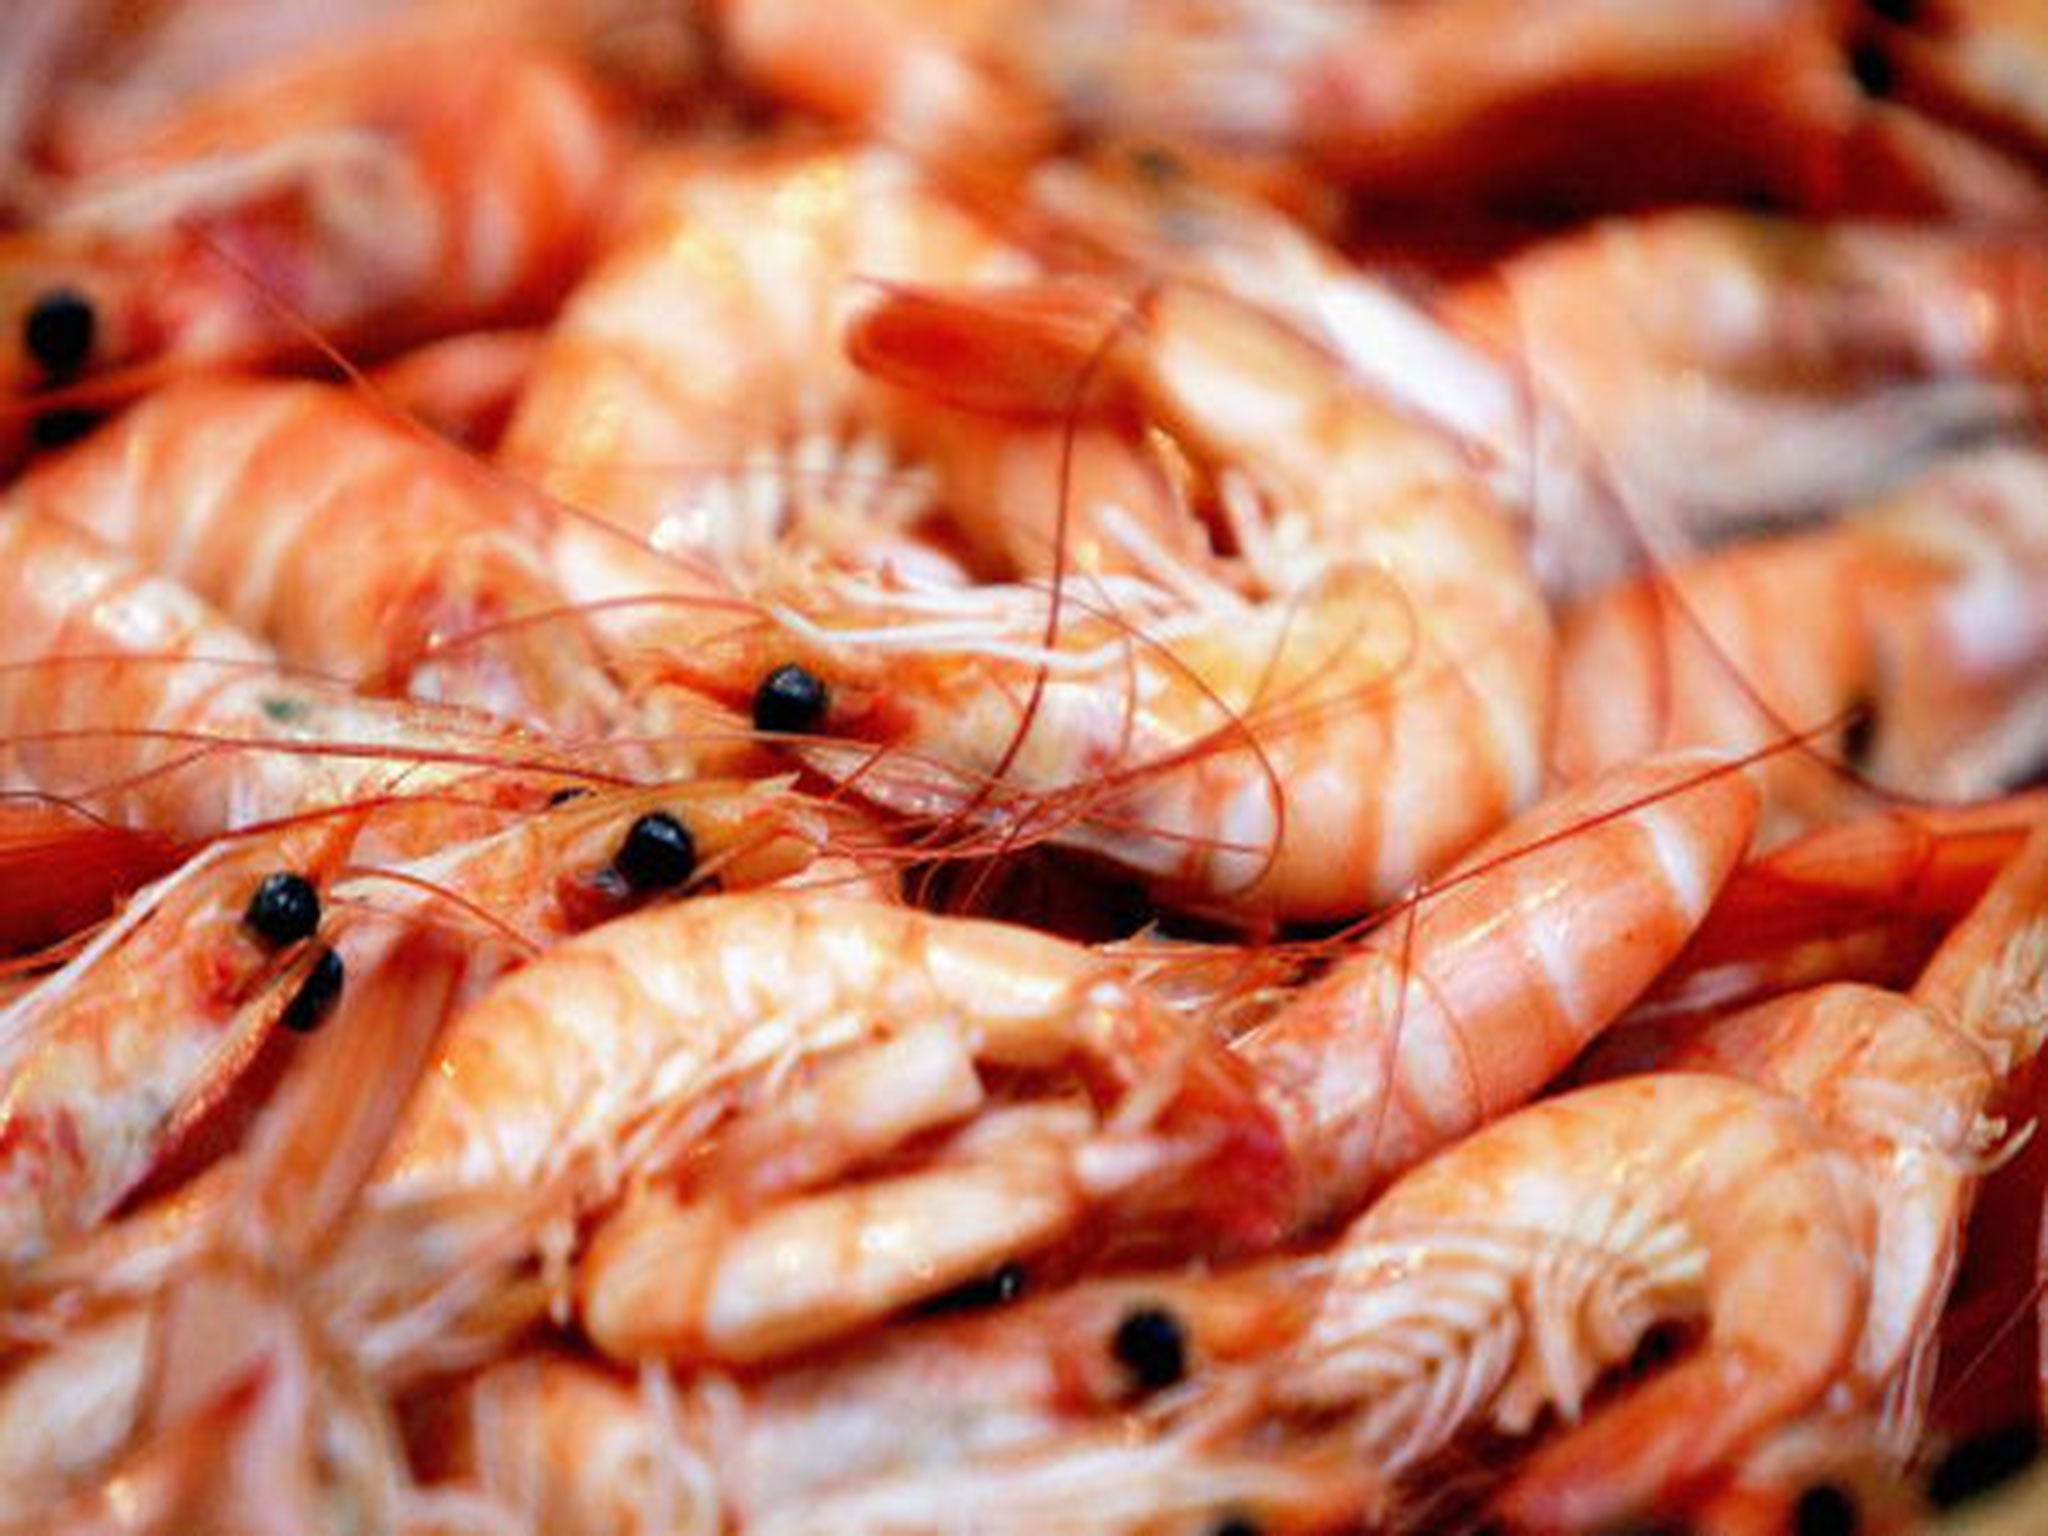 Shell-shocked: snaps of fresh seafood caused a social media kerfuffle